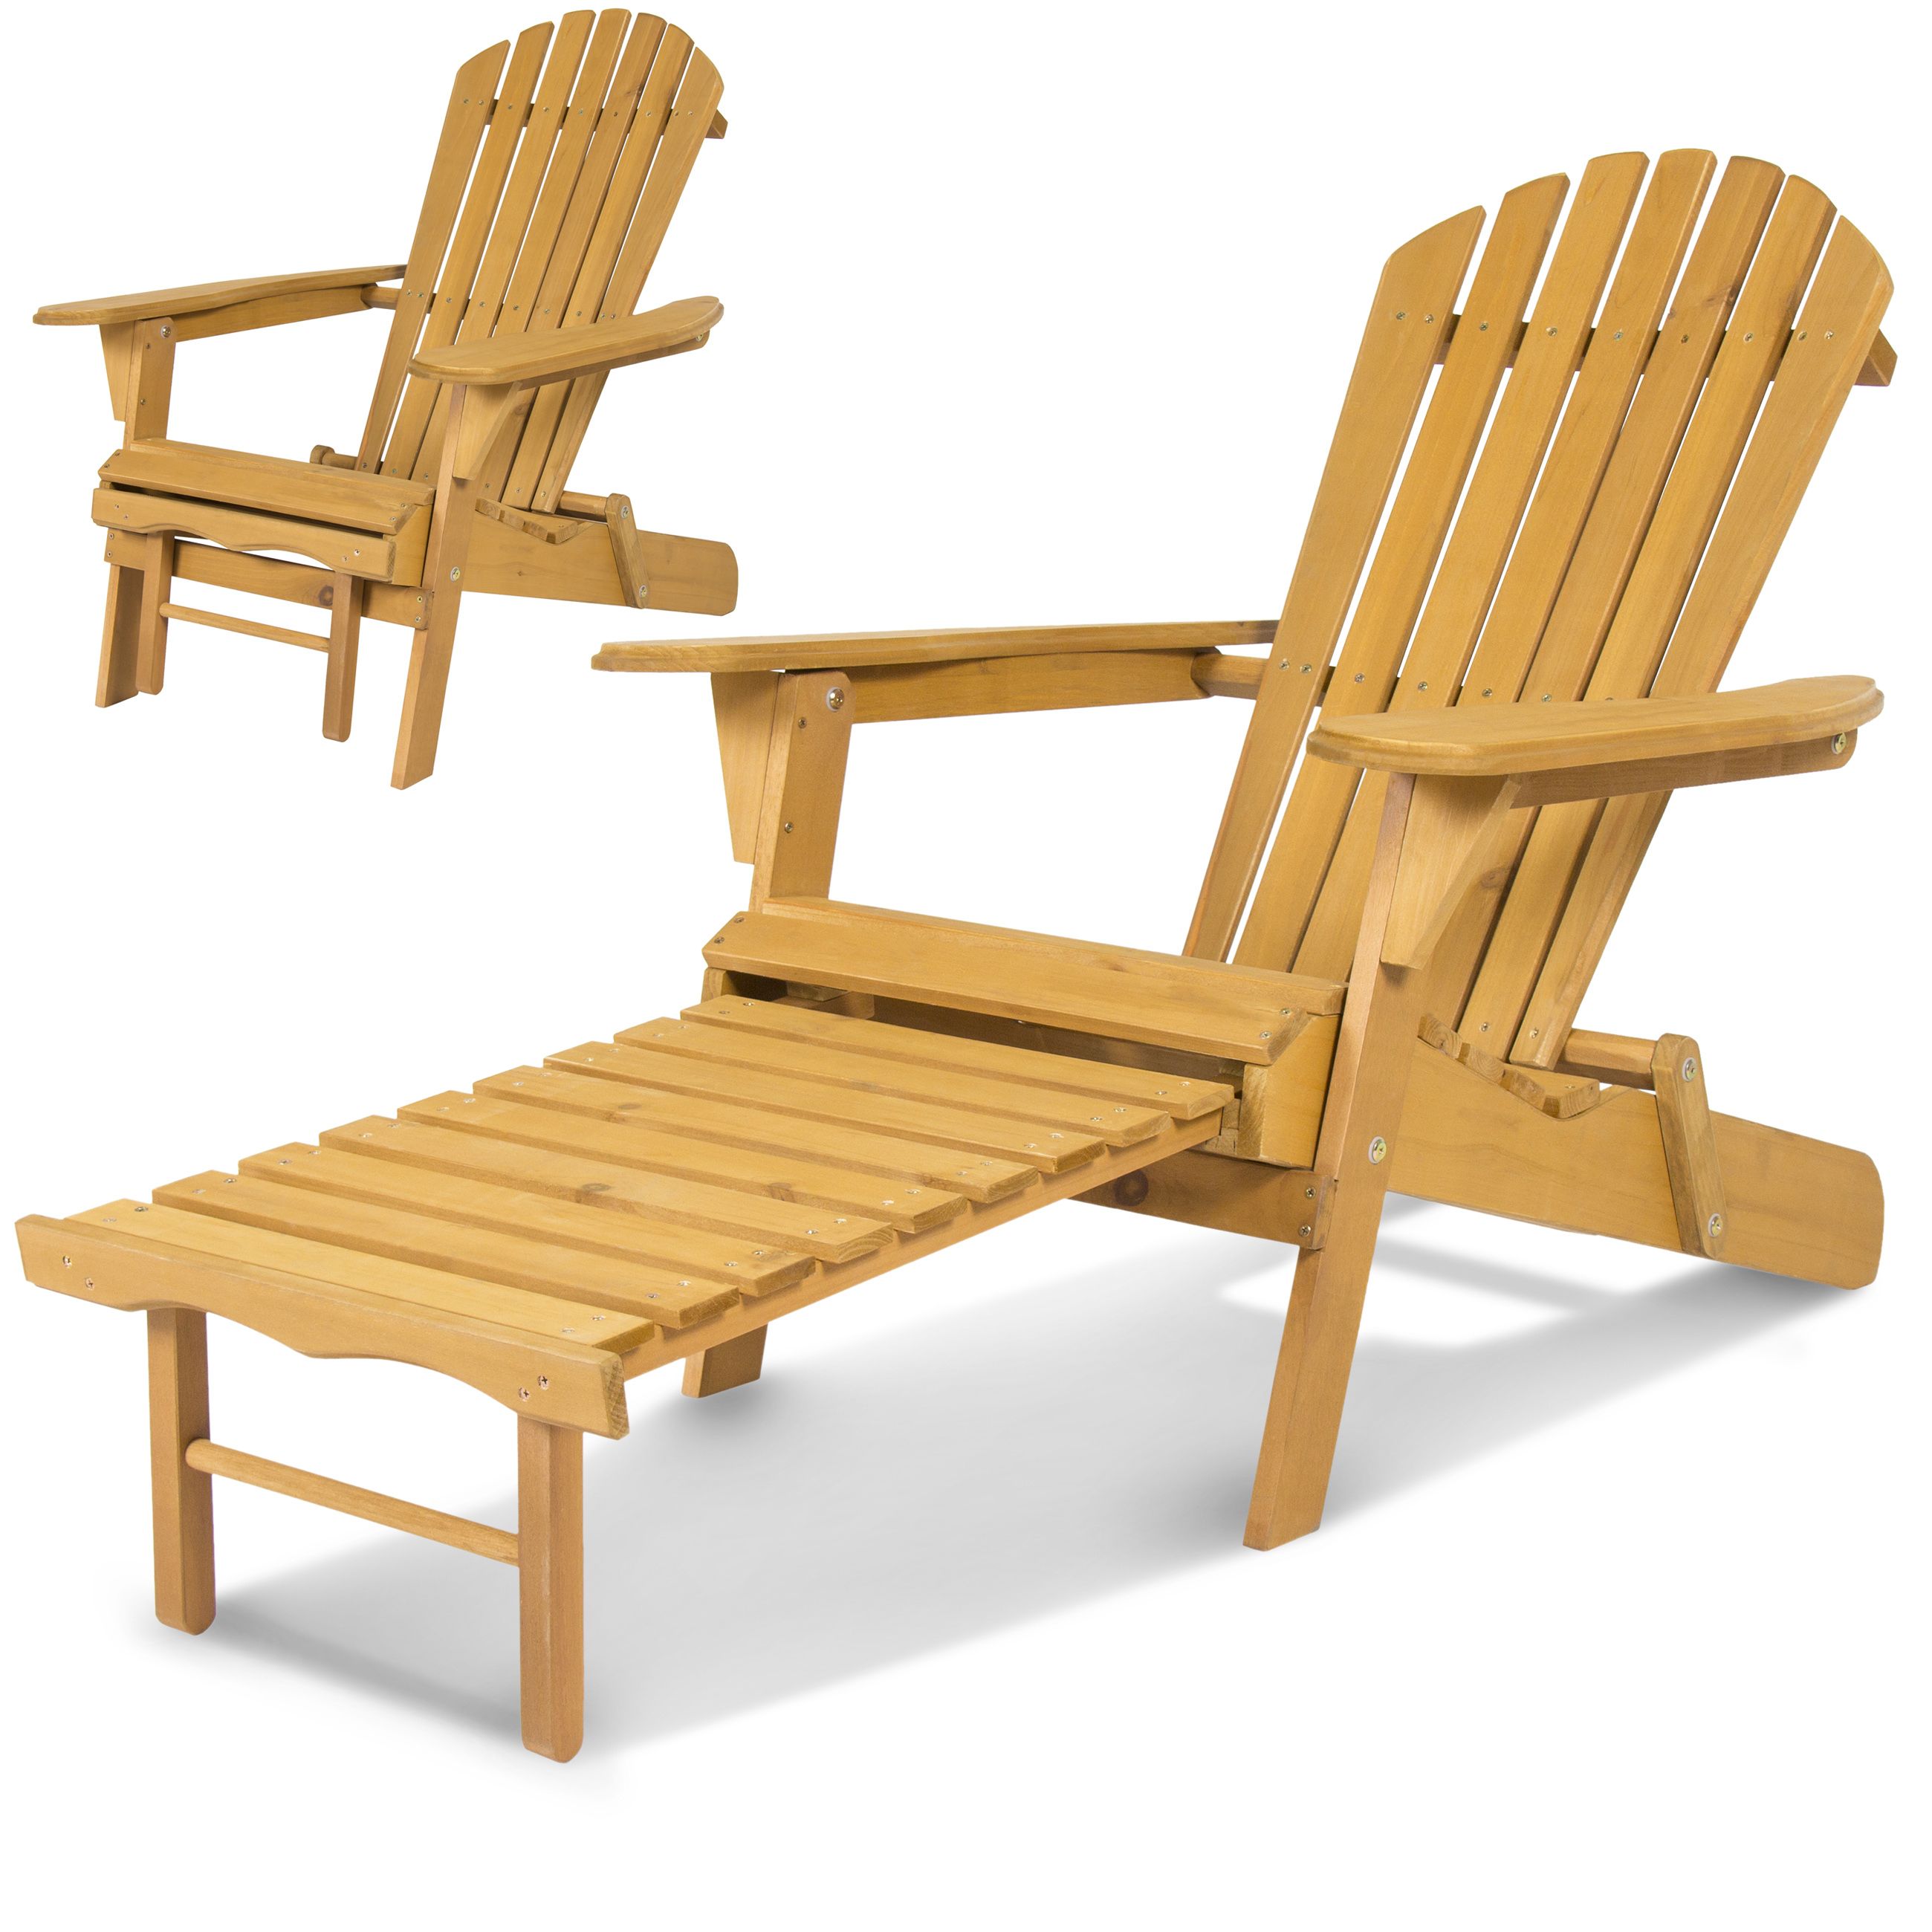 Newest Handmade White Folding Adirondack Pull Out Footrest Chairs Intended For Best Choice Products Foldable Wood Adirondack Chair W/ Pull Out Ottoman (View 1 of 25)